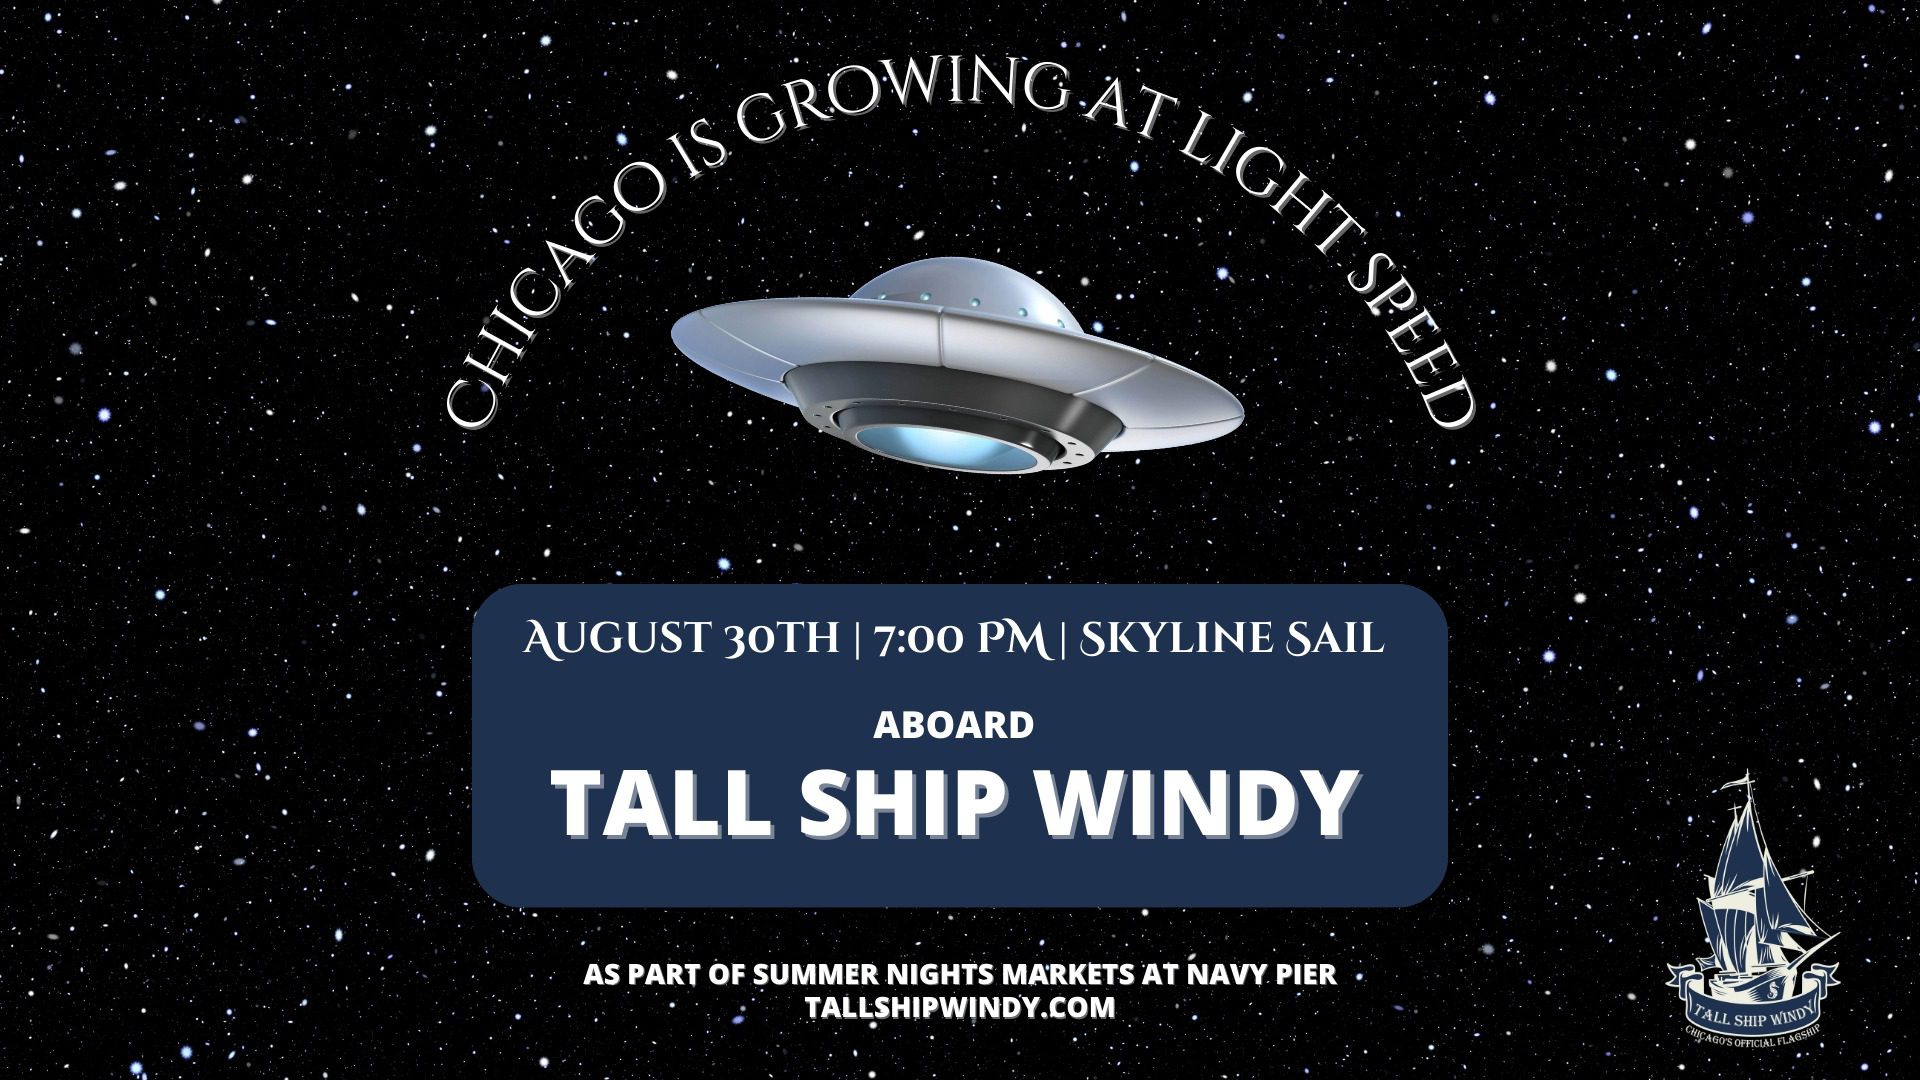 Skyline Sail of Tall Ship Windy at Navy Pier Graphic